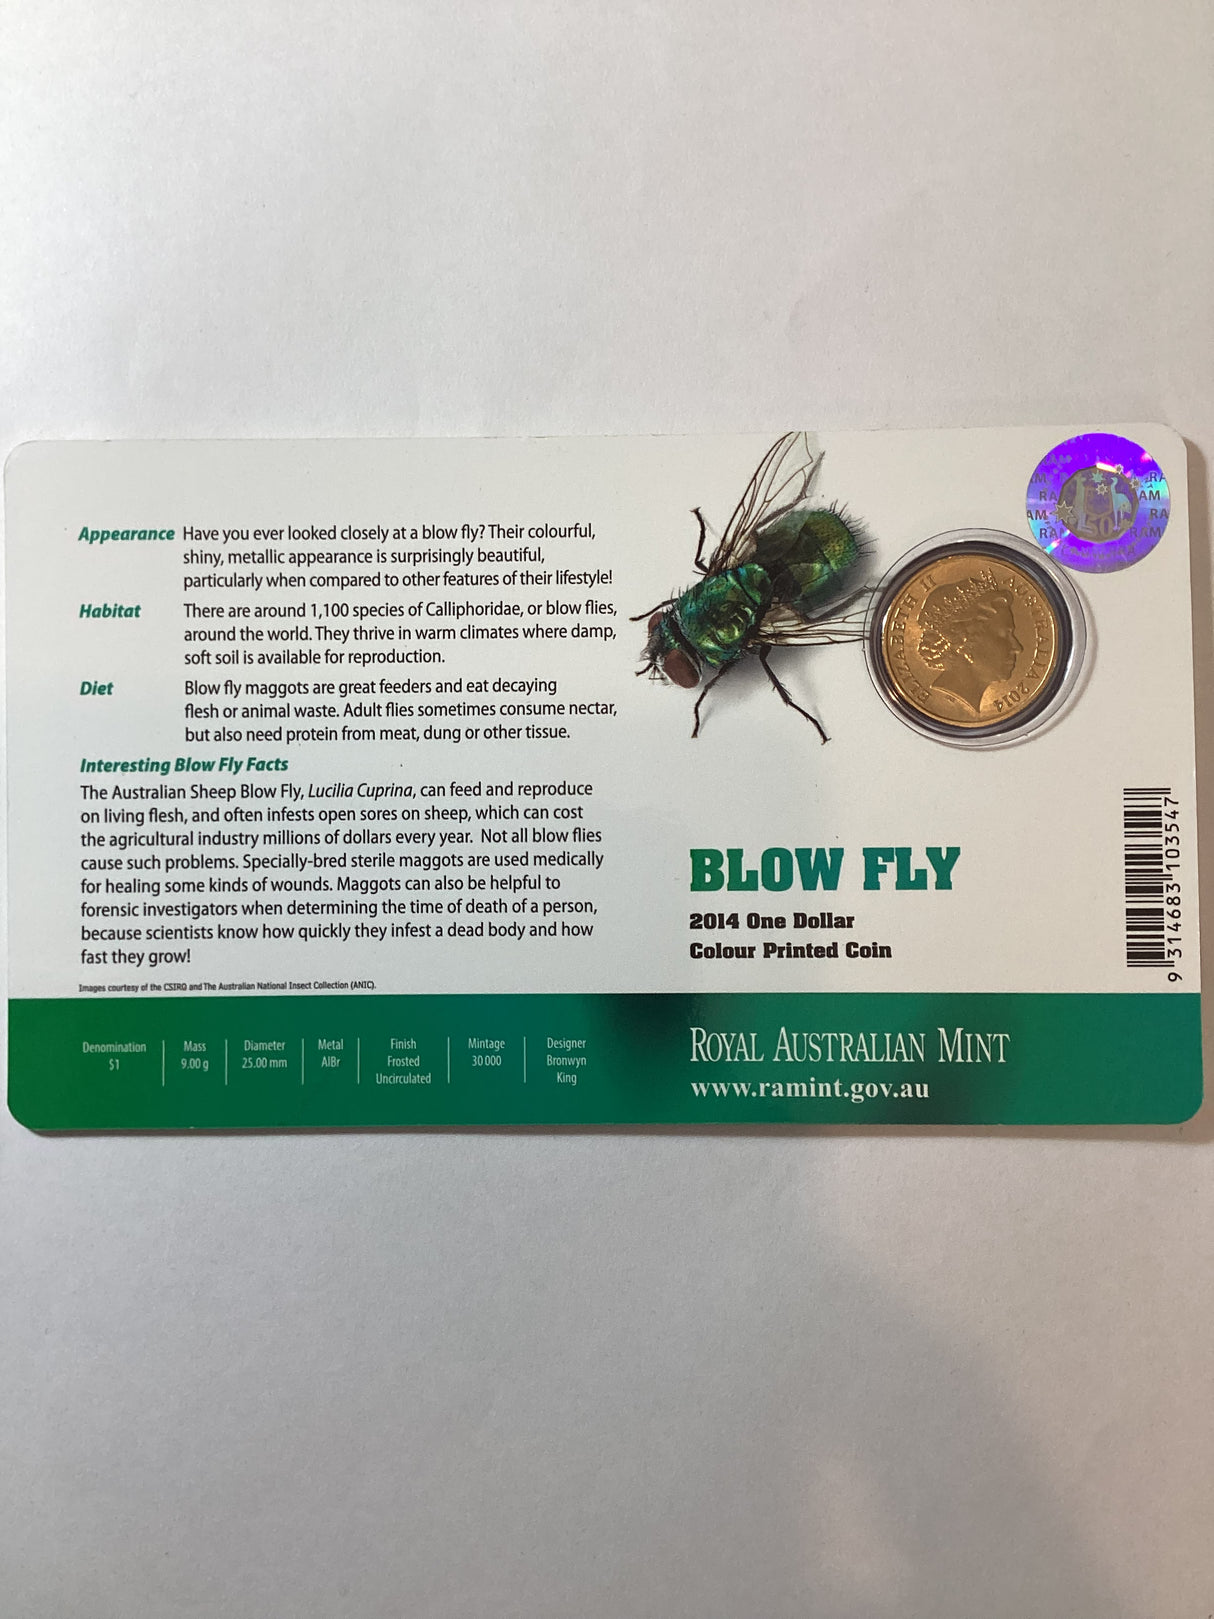 2014 $1 Blow Fly Colour Printed Coin